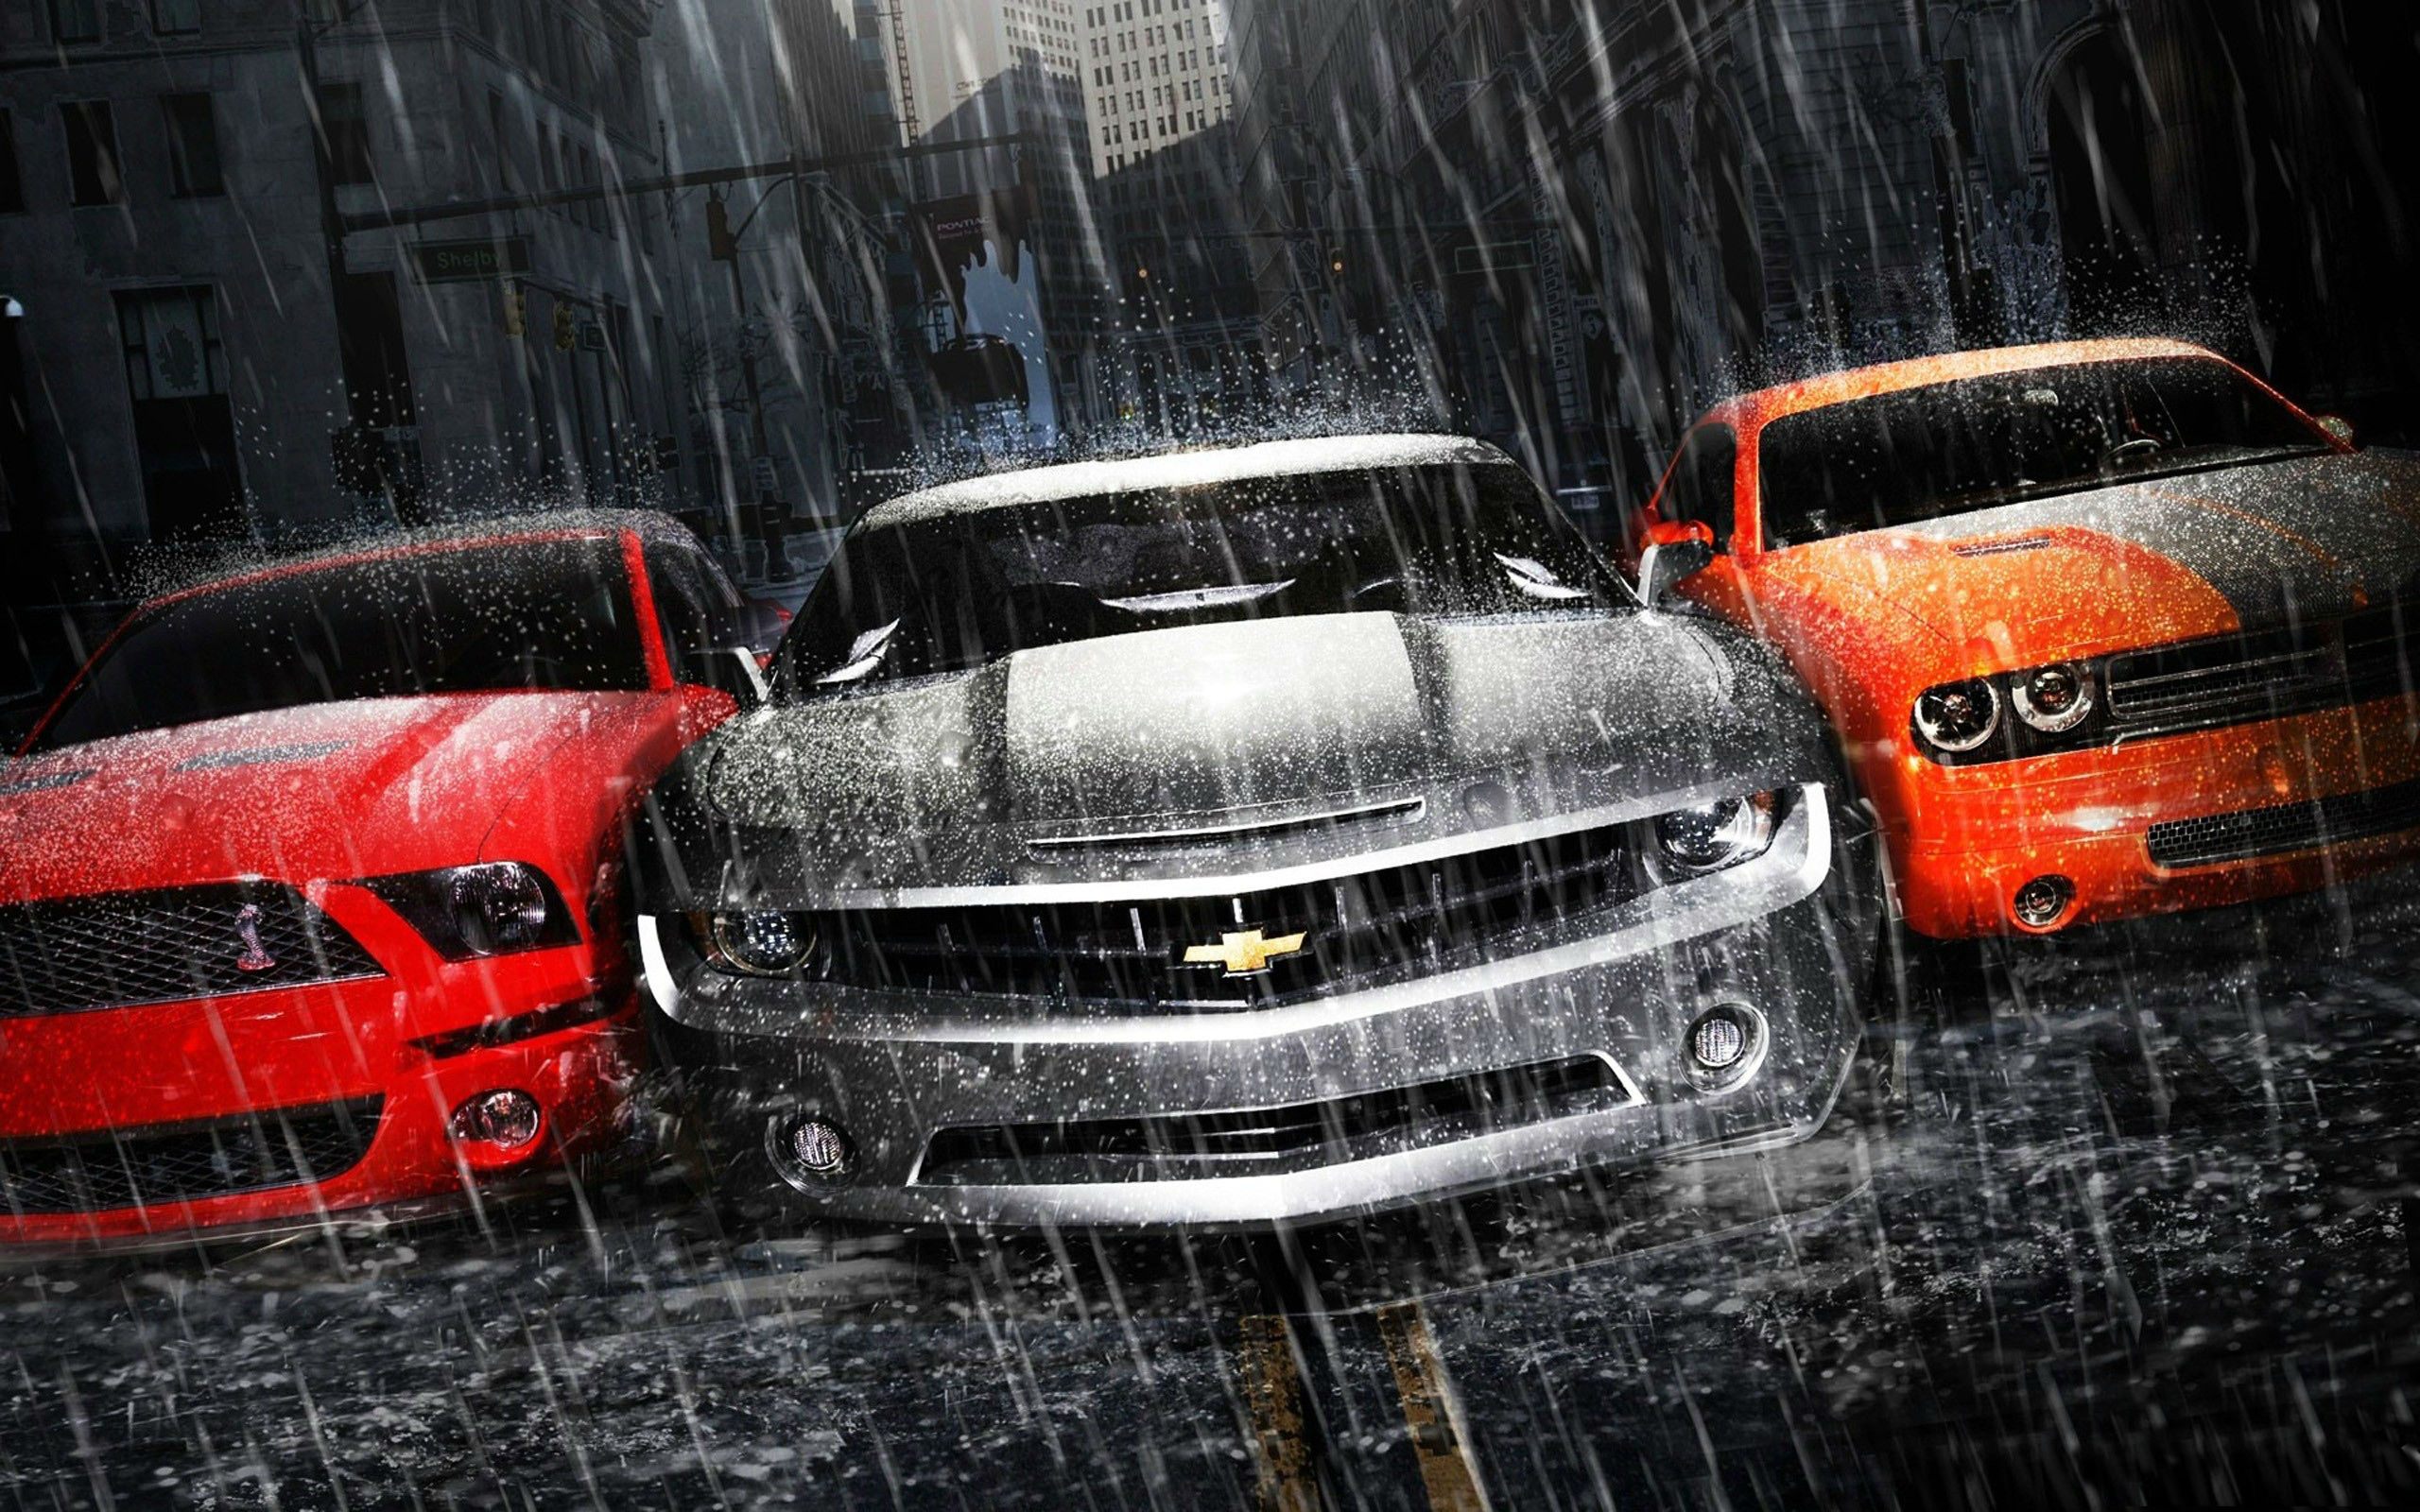 General 2560x1600 car Chevrolet Camaro Dodge Challenger Ford Mustang rain city vehicle red cars silver cars orange cars Ford Mustang S-197 Ford muscle cars American cars